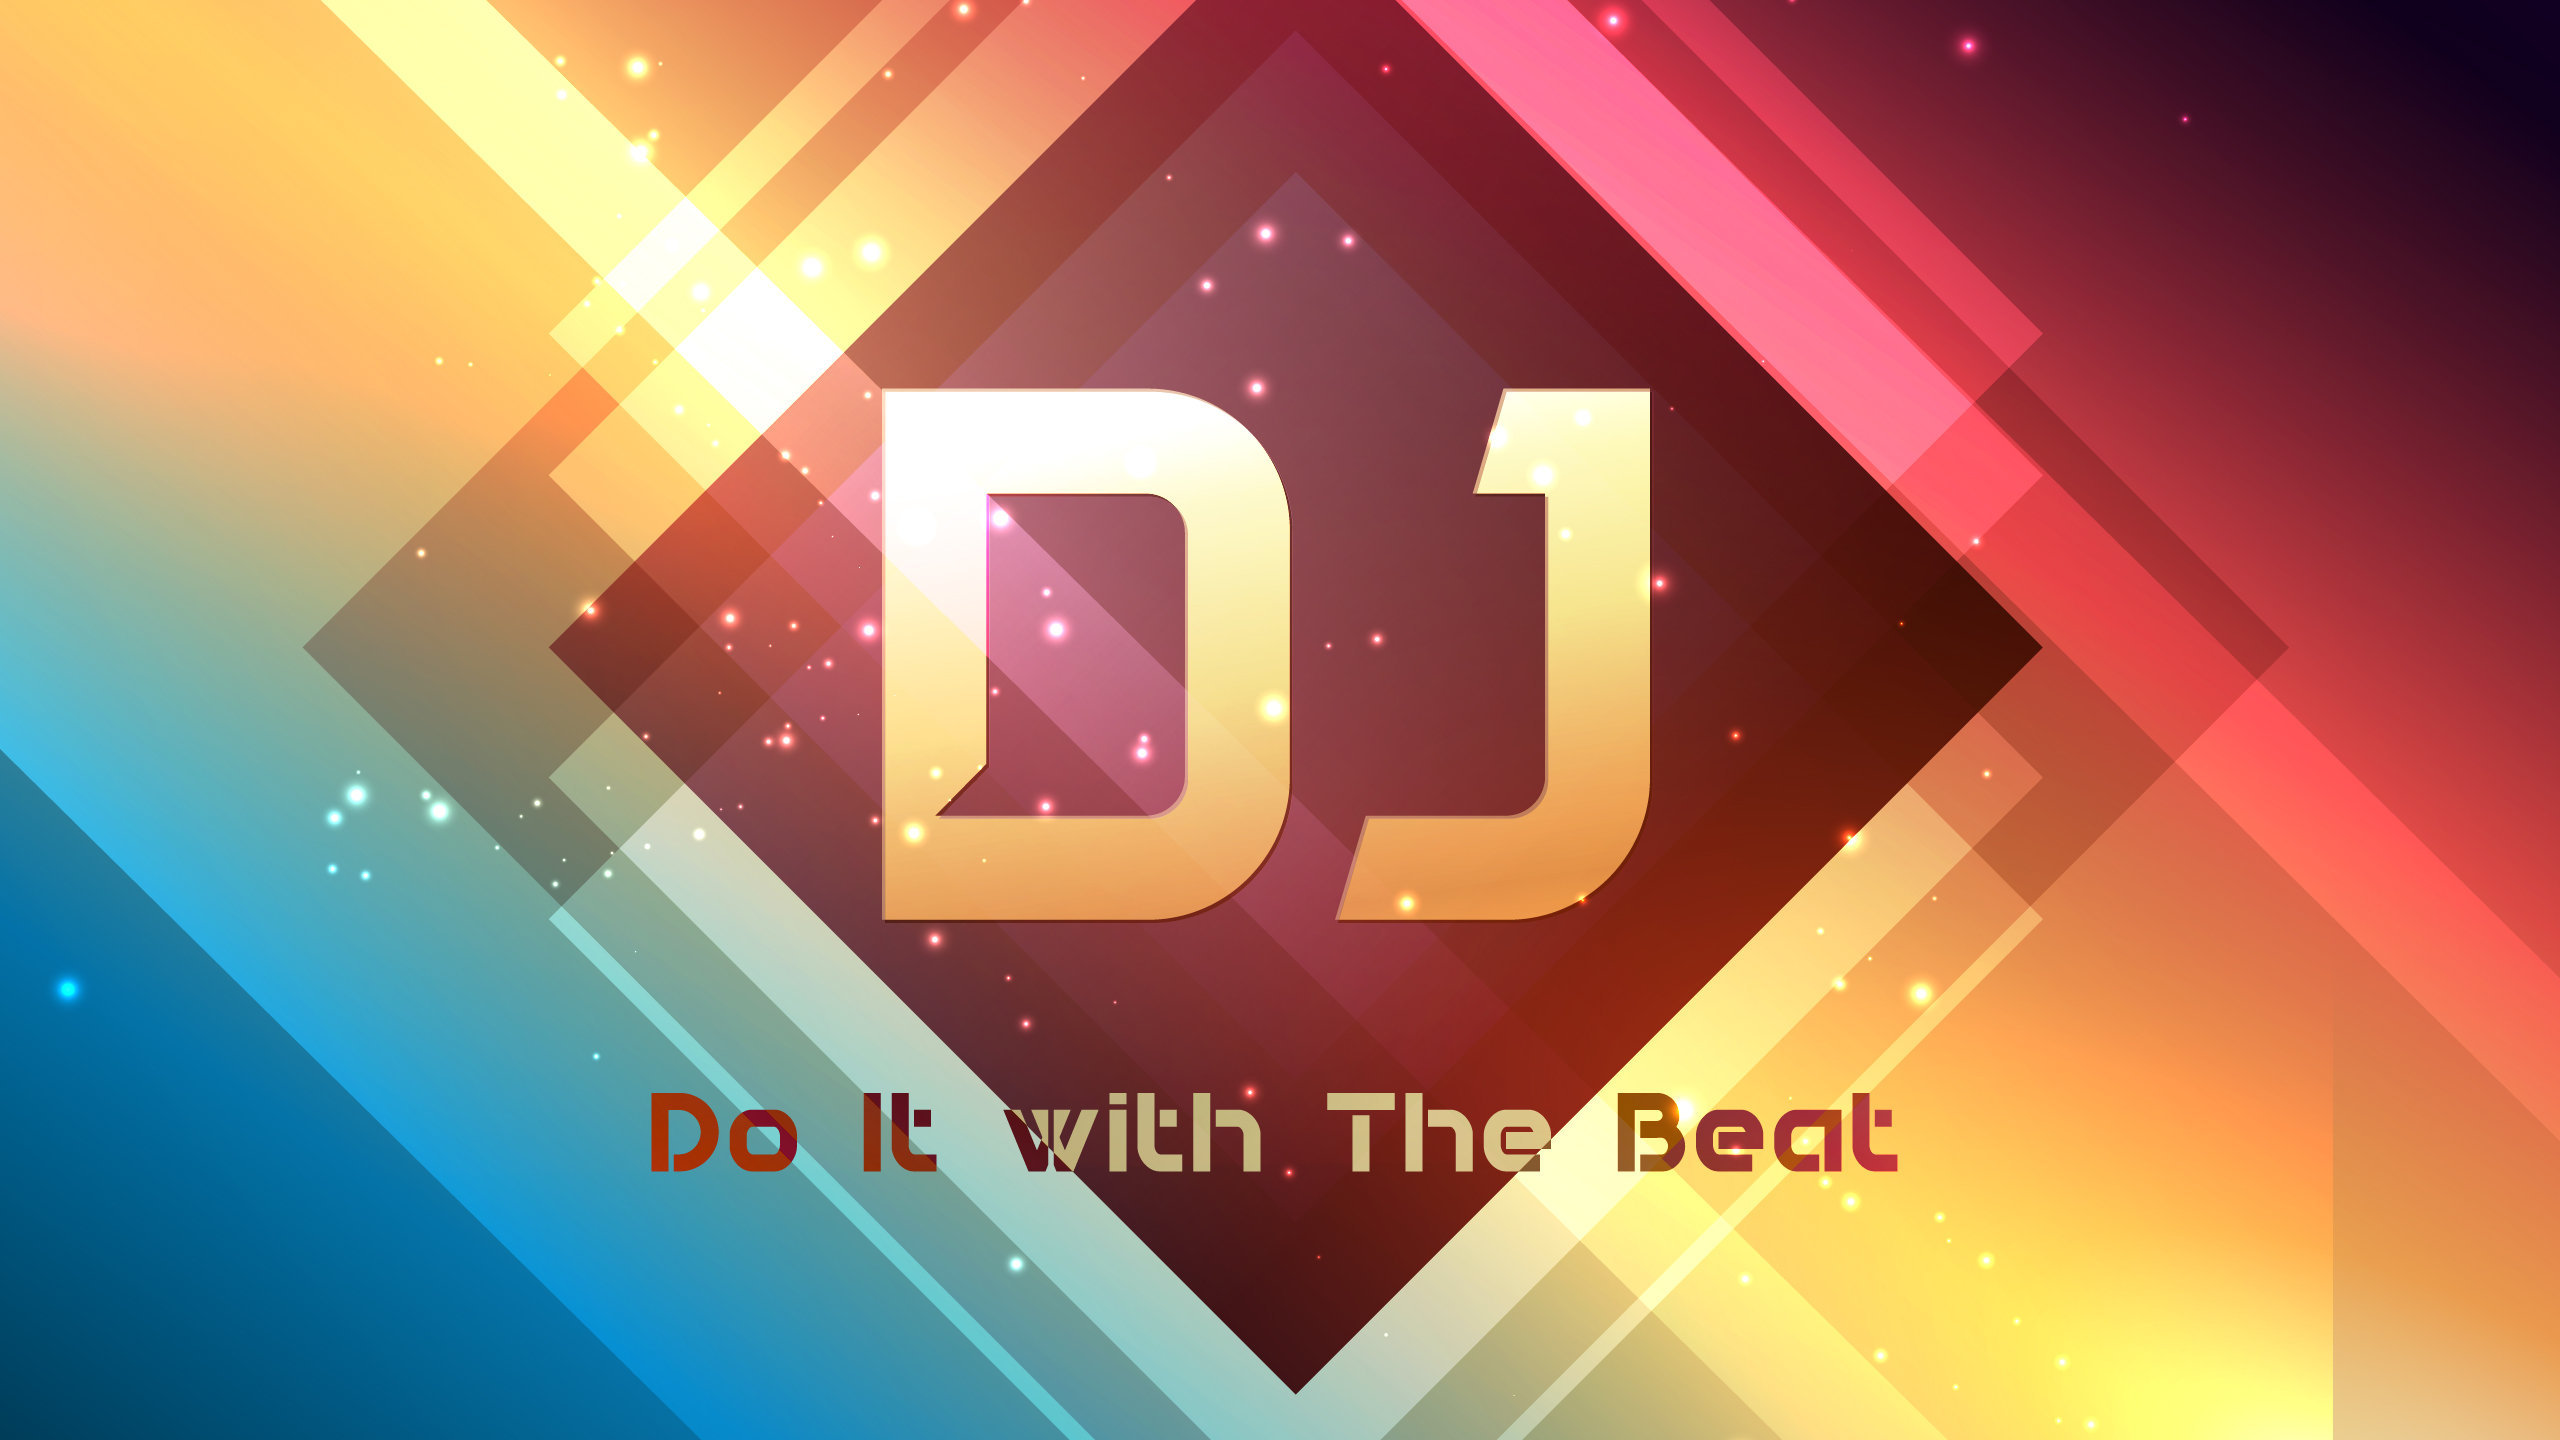 DJ Do It With The Beat Wallpaper